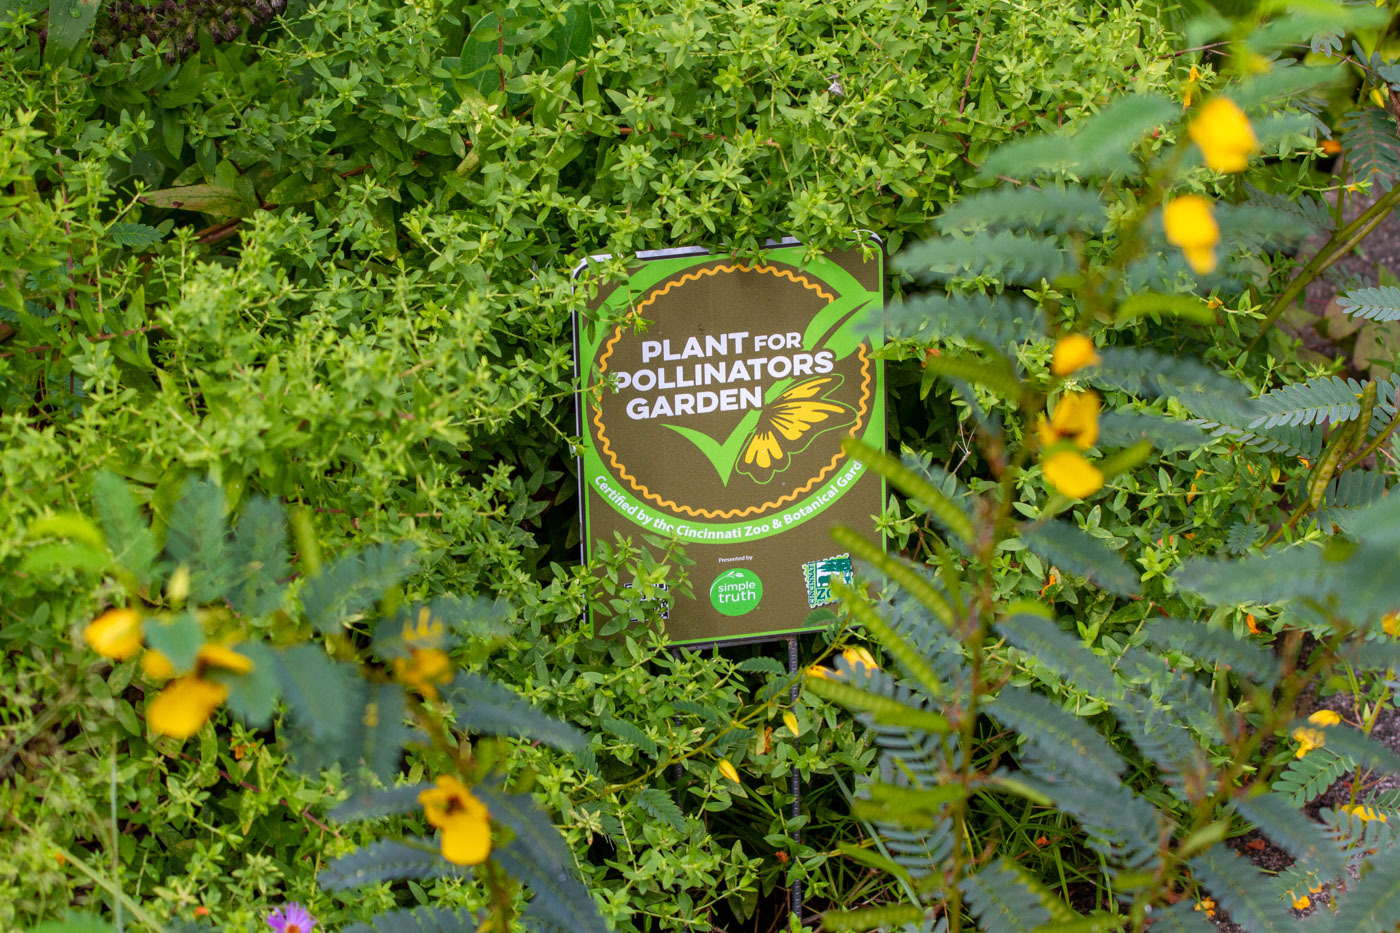 Grovedale Garden Plant for Pollinators sign